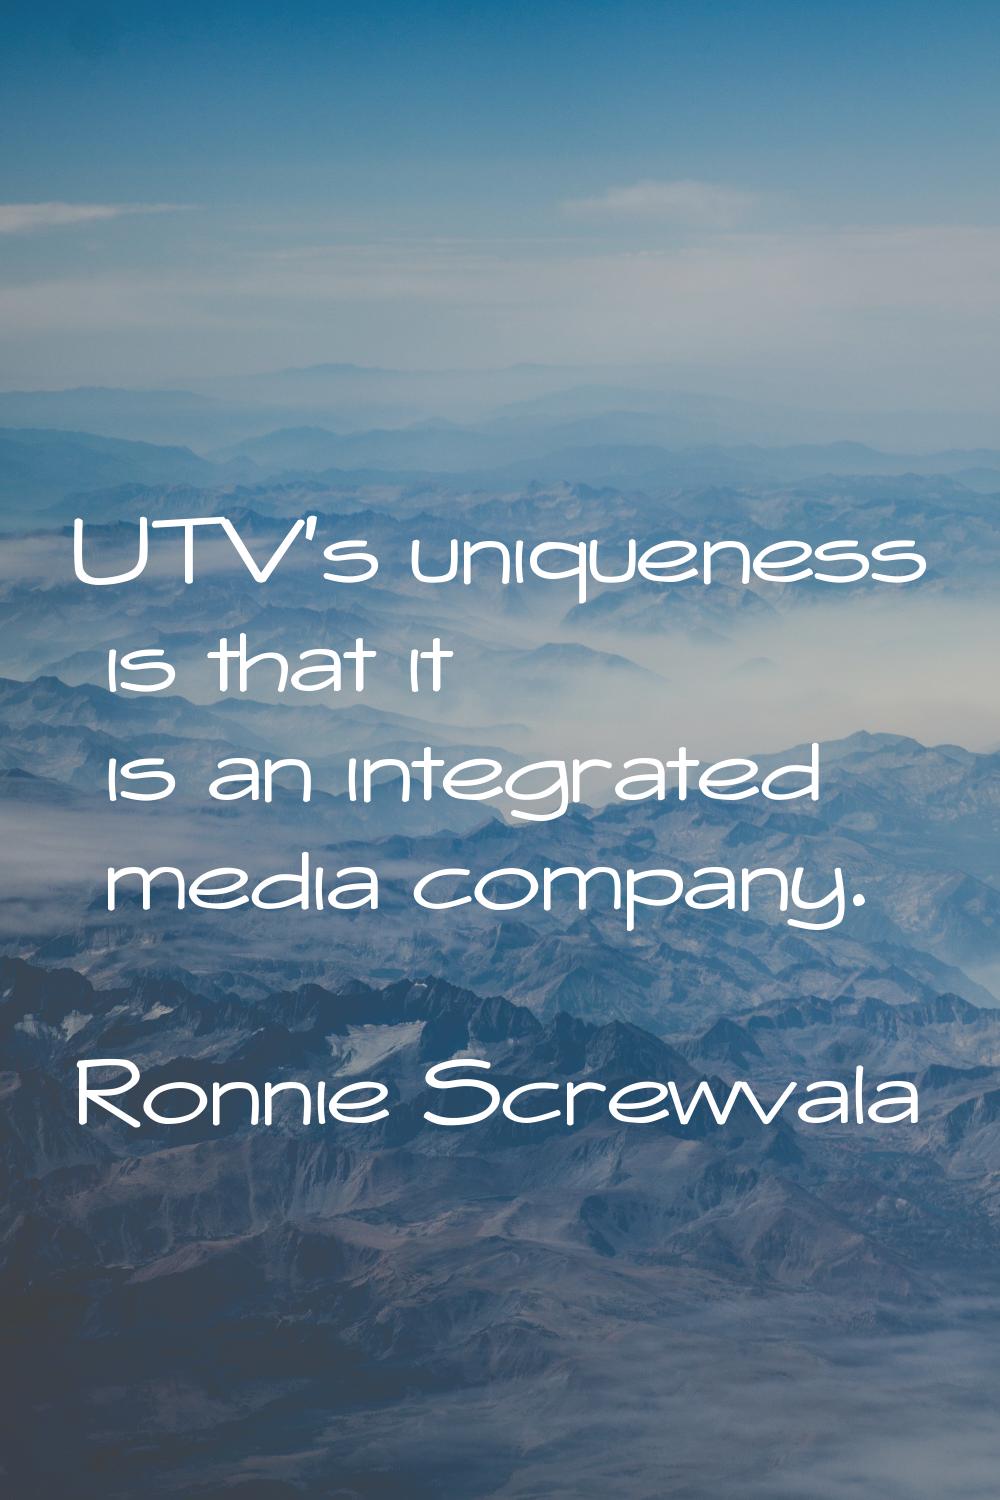 UTV's uniqueness is that it is an integrated media company.